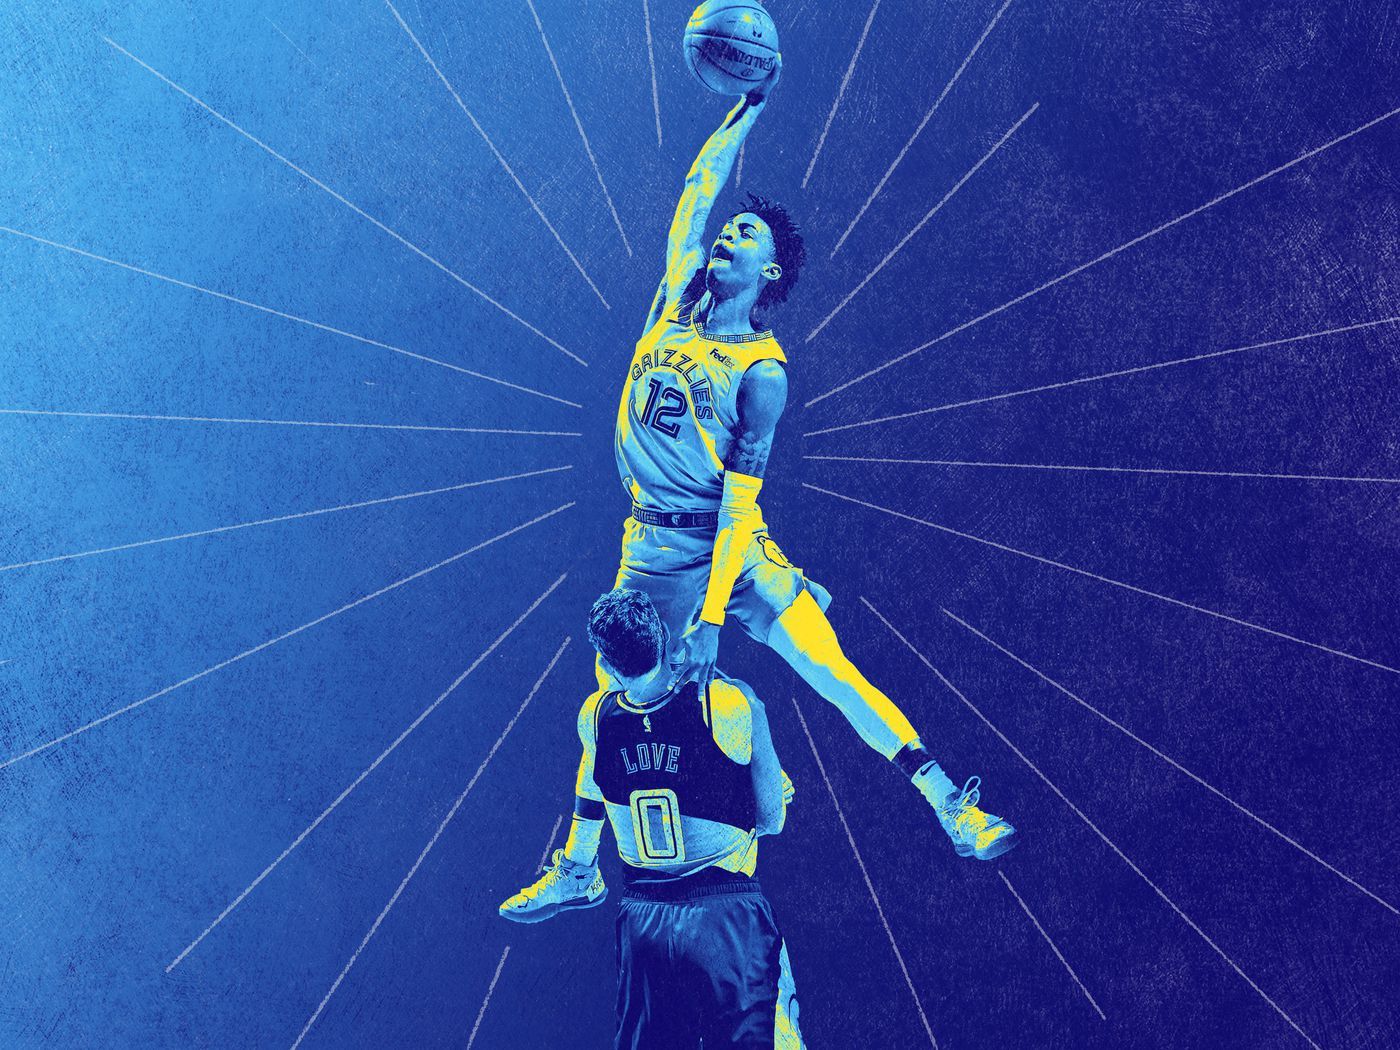 Ja Morant's Almost Dunk On Kevin Love: Defining Moments Of 2019 29 NBA Season